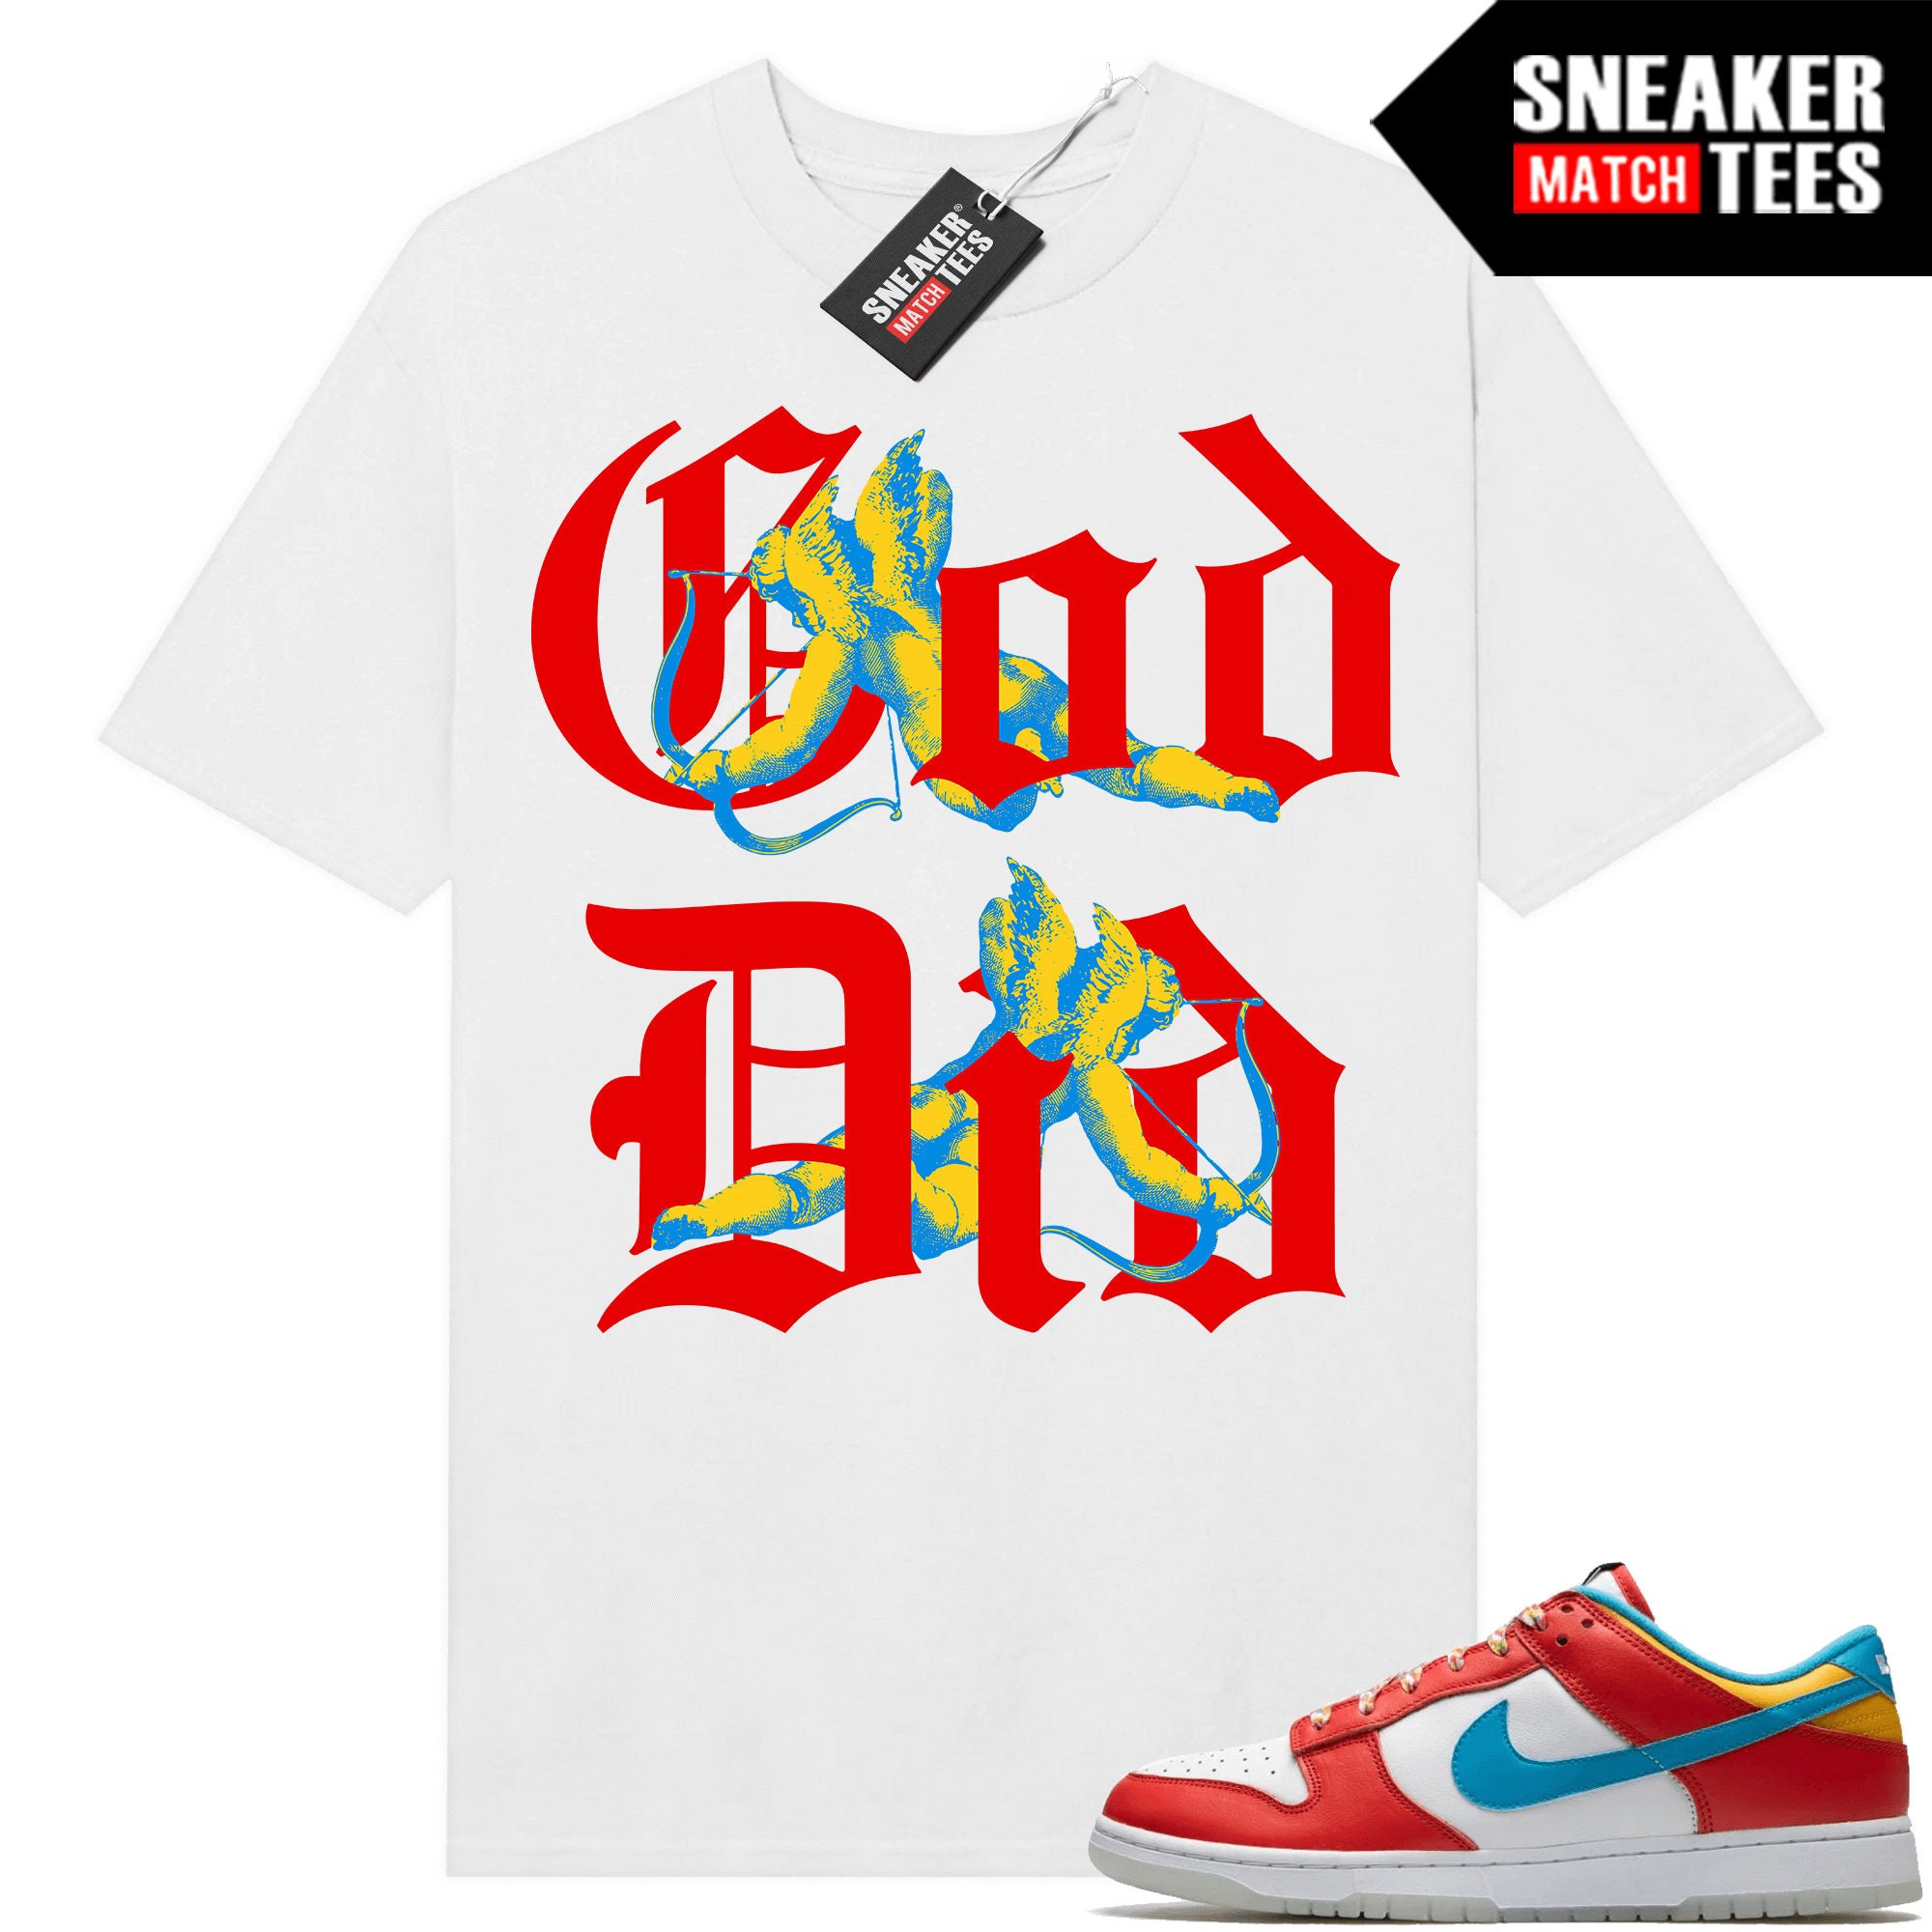 Fruity Pebbles Dunk Low shirts to match Sneaker Match Tees White "God Did"